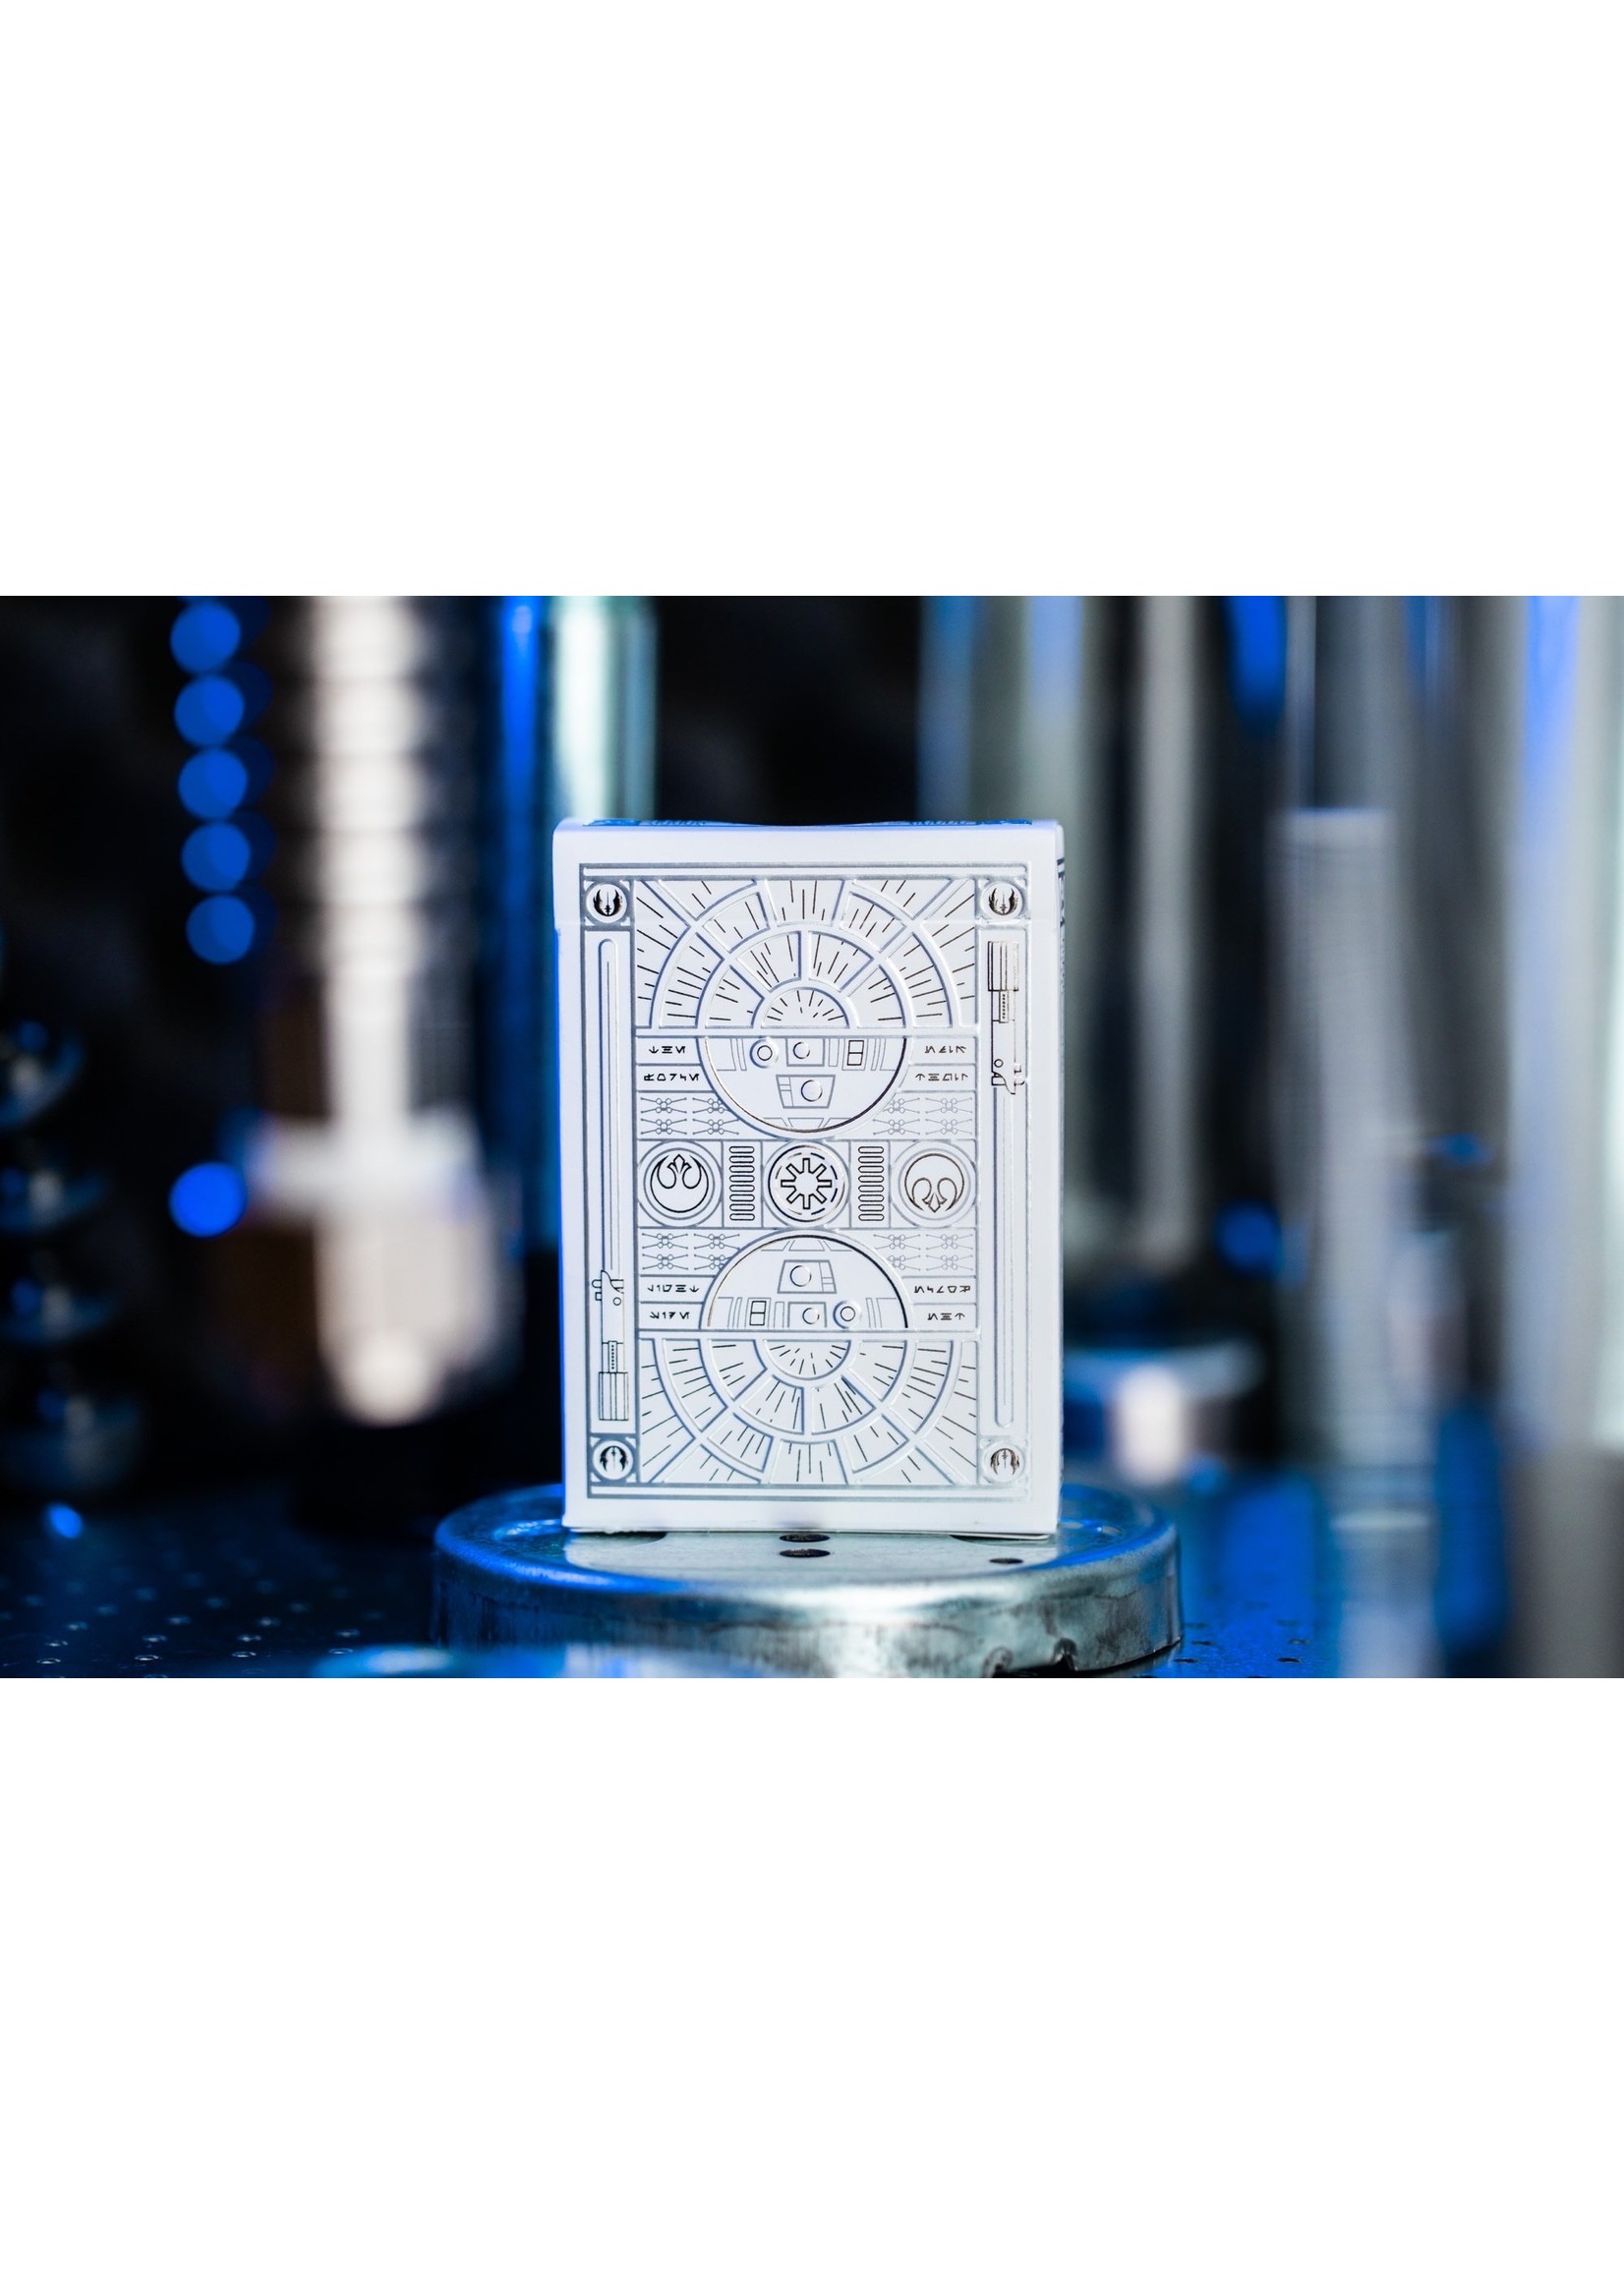 Theory11 Theory11: Star Wars Silver Edition On White Playing Cards